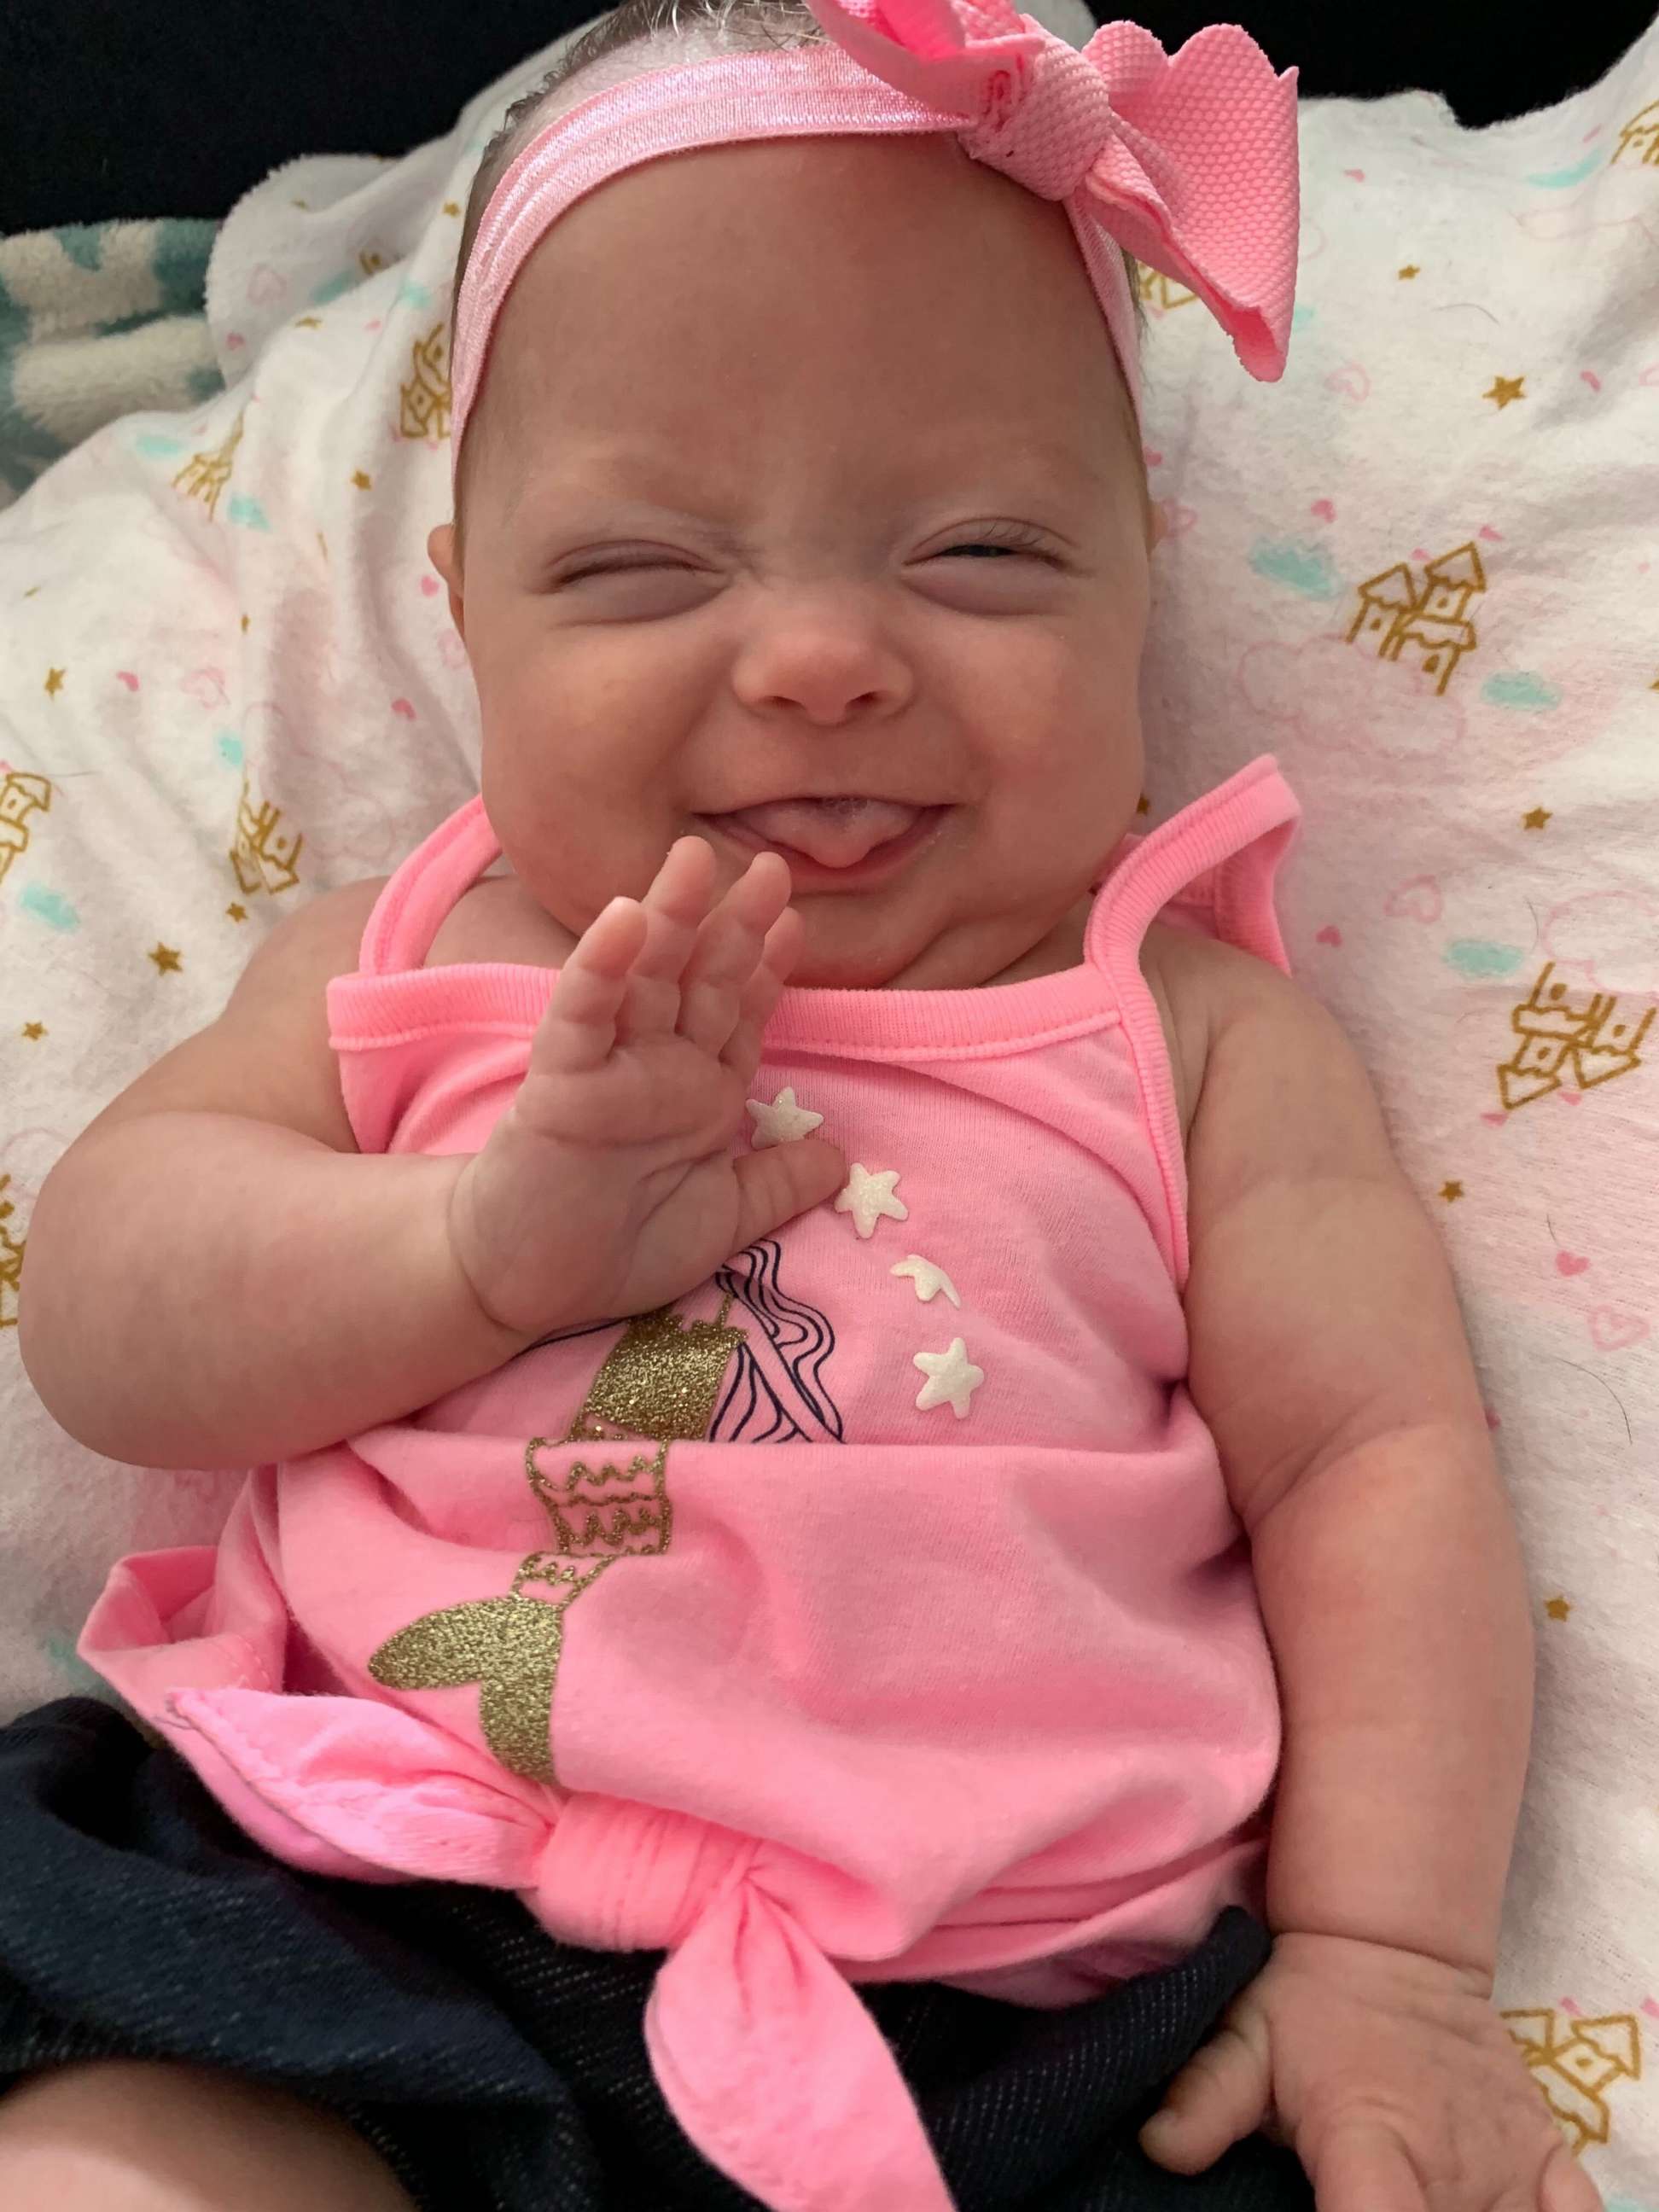 PHOTO: Mikayla Petti was born at 24 weeks weighing 1 pound, 9 ounces on Feb. 15, 2020. She arrived 16 weeks early inside mom and dad Maria and Andrew Petti's vehicle on the way to St. Joseph's emergency room in Bethpage, New York.